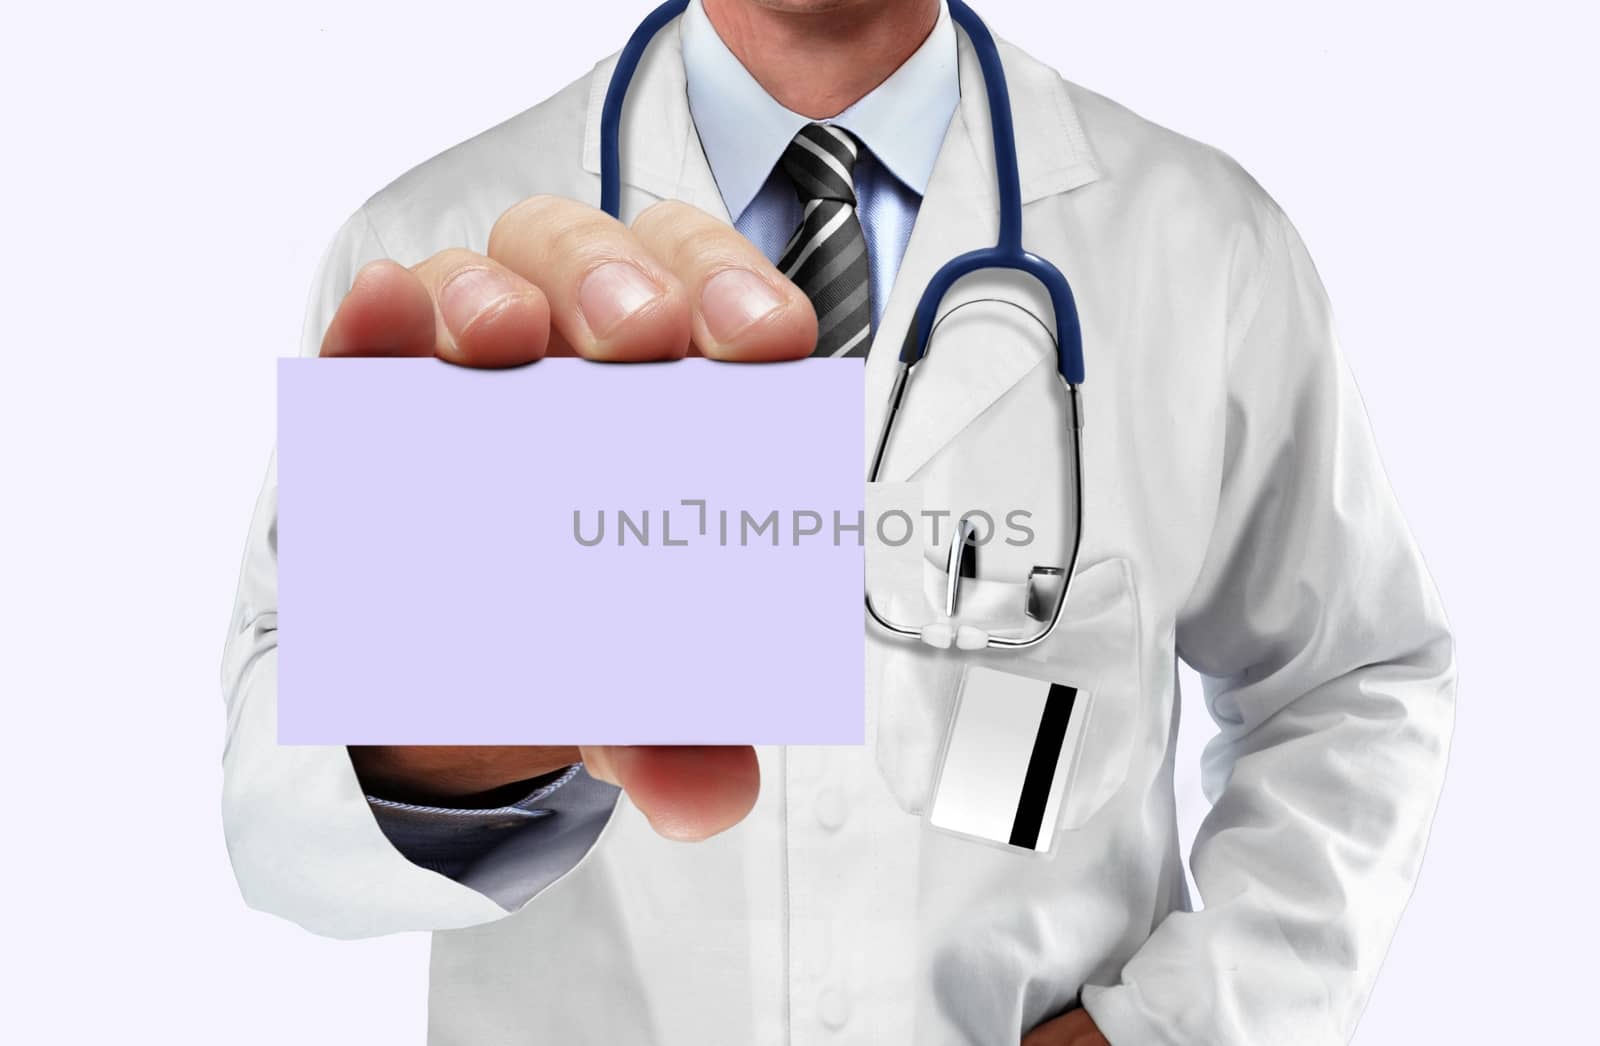 Doctor showing call card